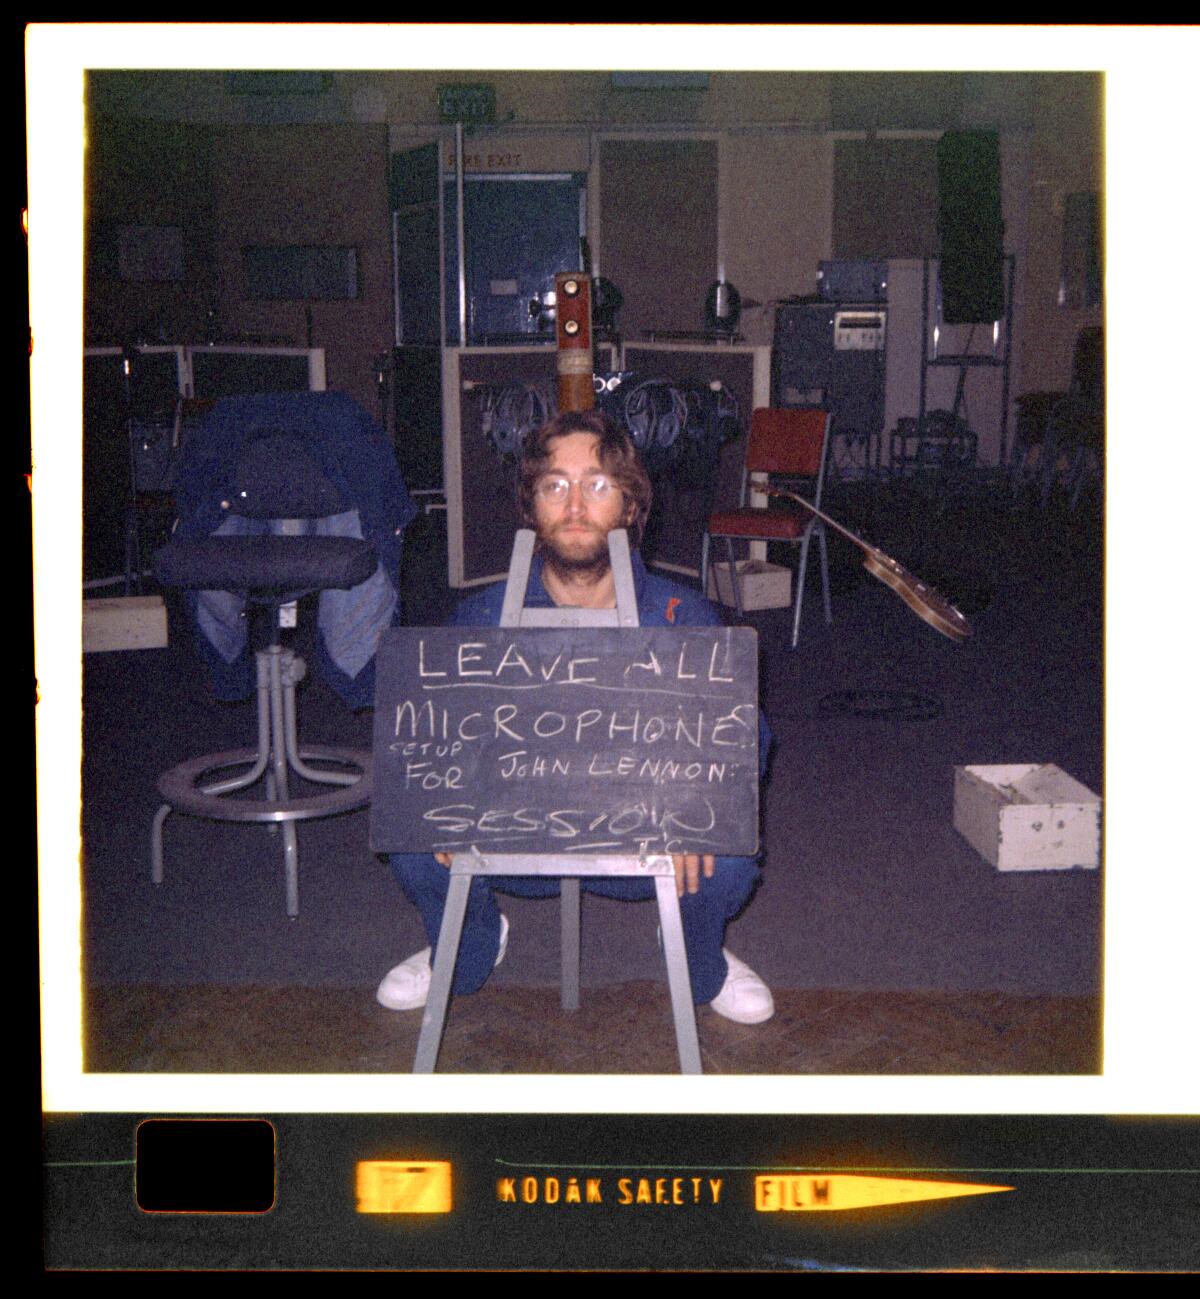 John Lennon poses with a chalkboard reminding EMI Studios staff to "Leave all microphones set up for John Lennon session."